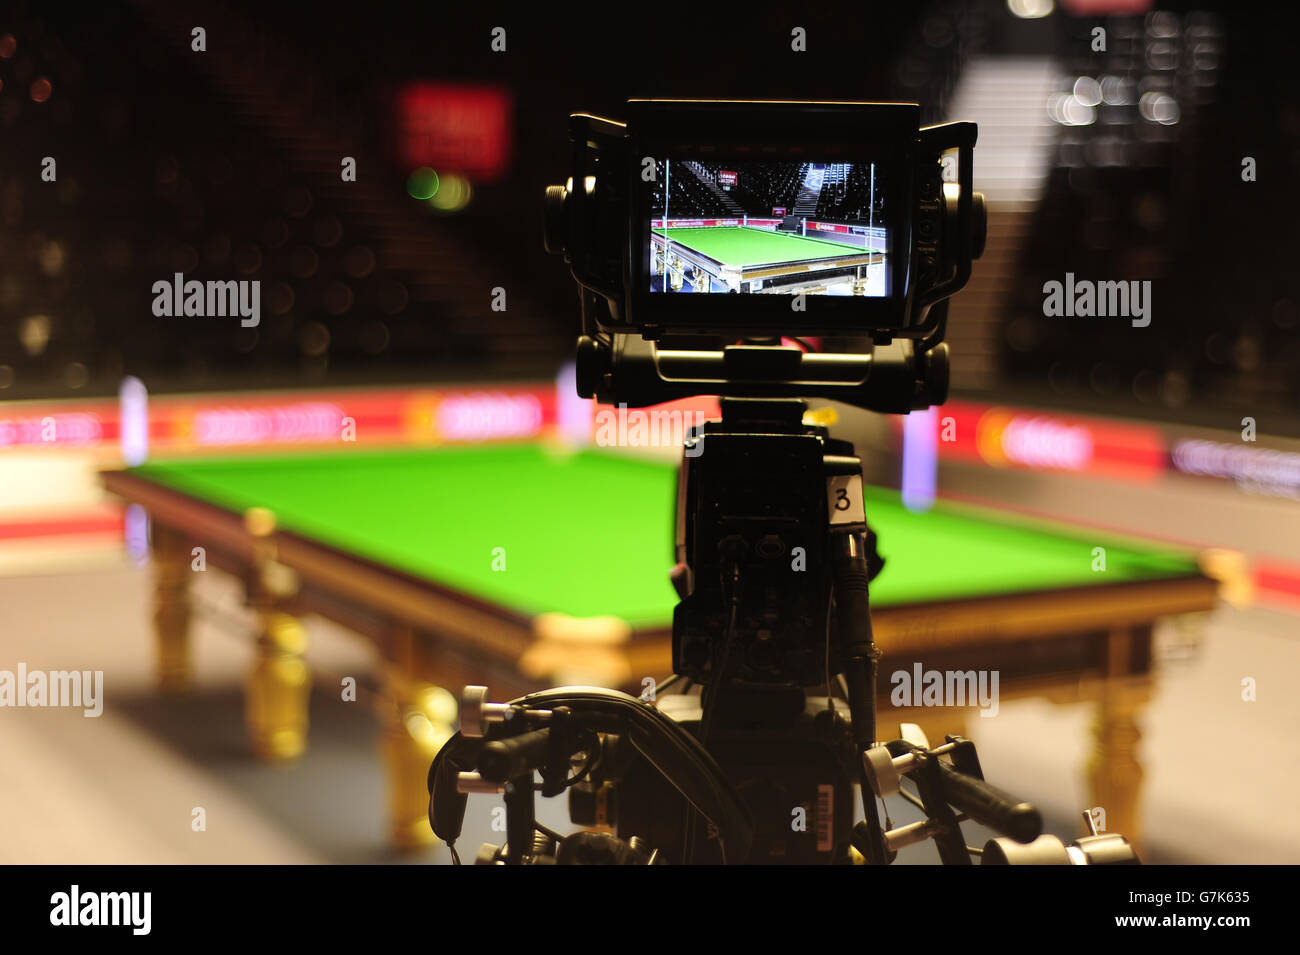 General view of the Masters Snooker table as seen through the view finder of a BBC Tv camera on day one of the 2015 Dafabet Masters at Alexandra Palace, London